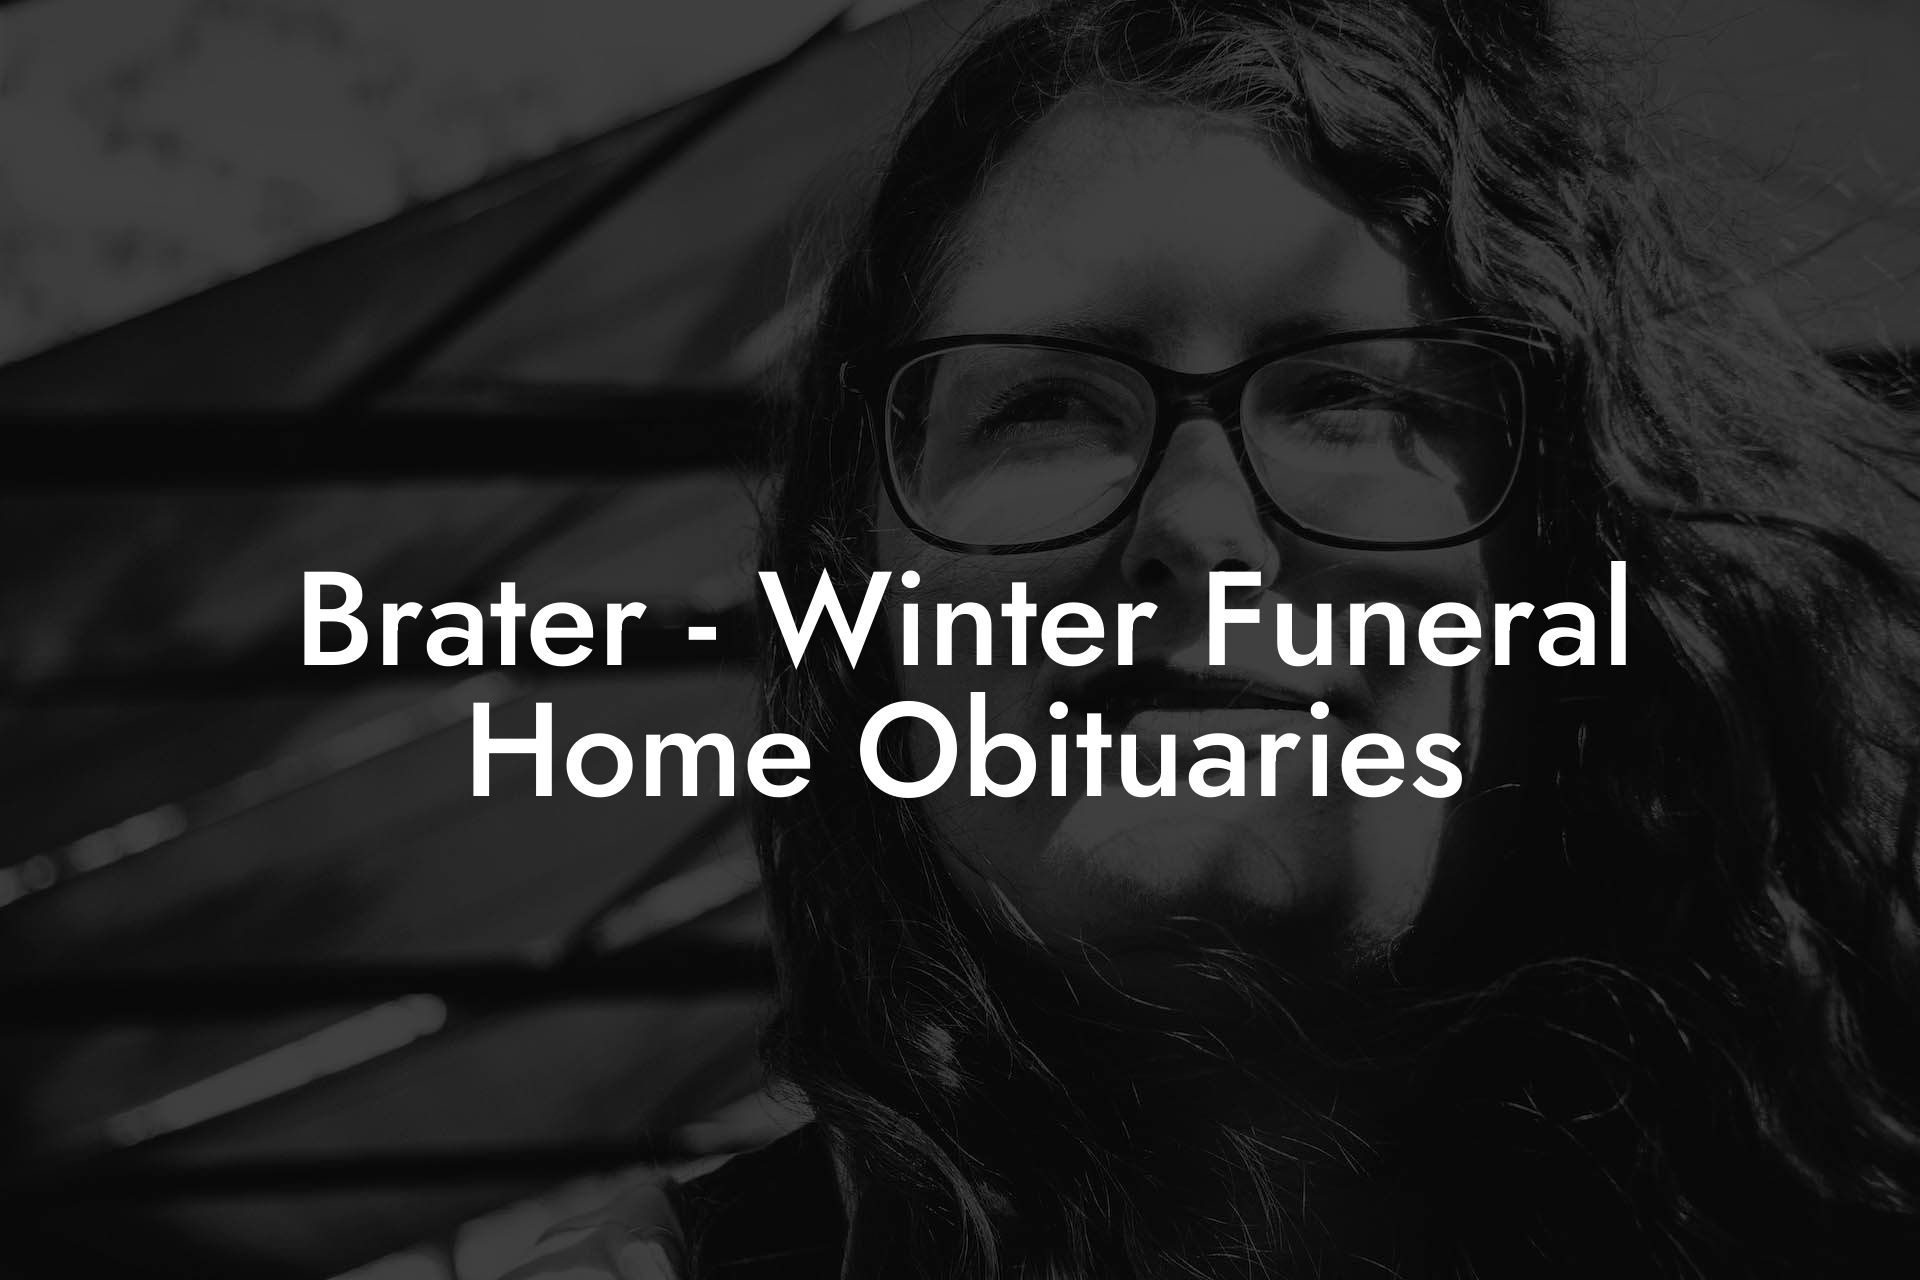 Brater - Winter Funeral Home Obituaries